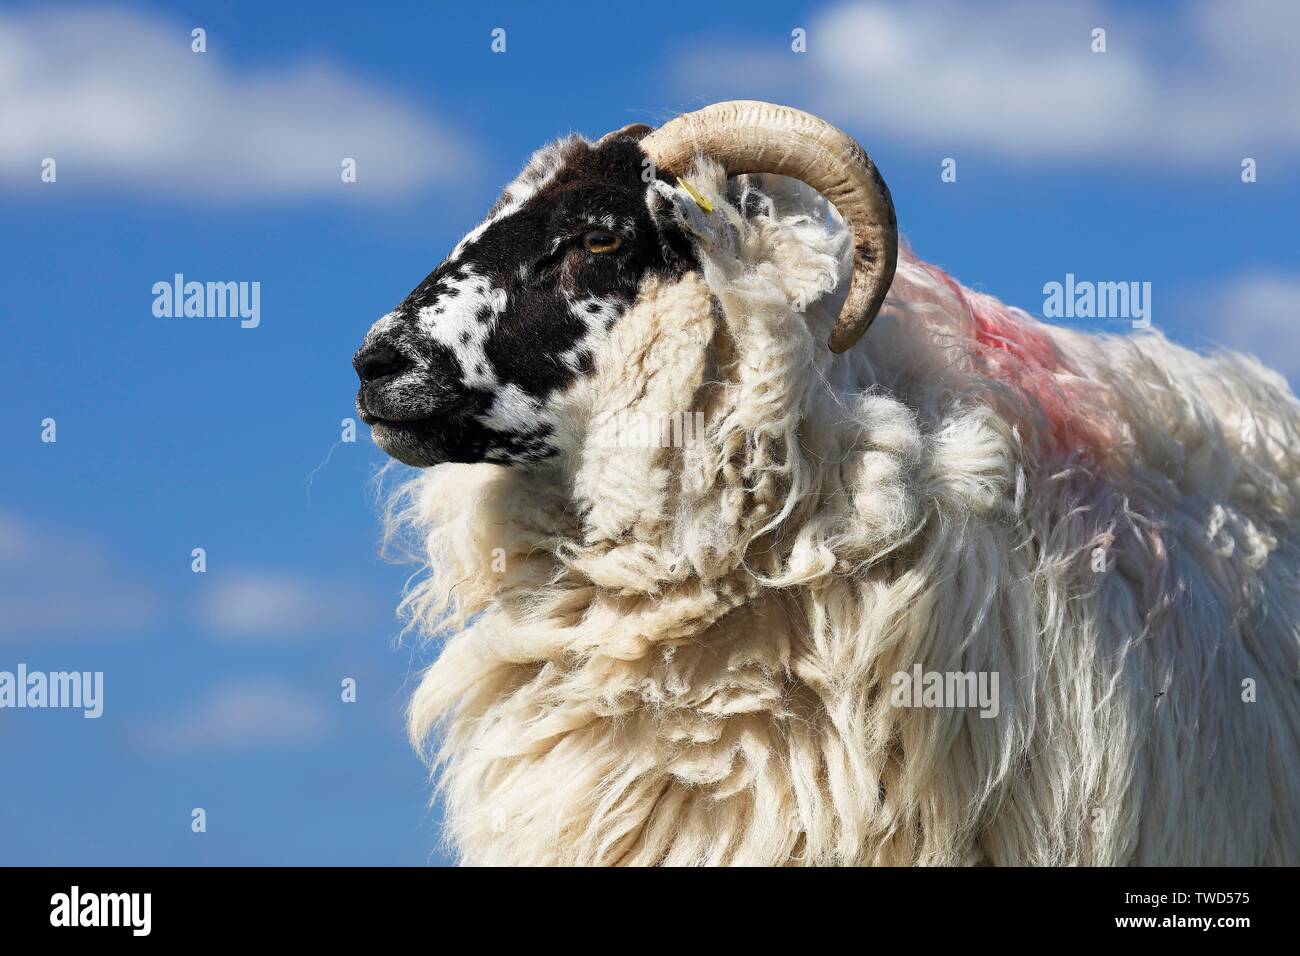 Domestic long-haired ram (Ovis gmelini aries) against blue cloudy sky, animal portrait, Schleswig-Holstein, Germany Stock Photo